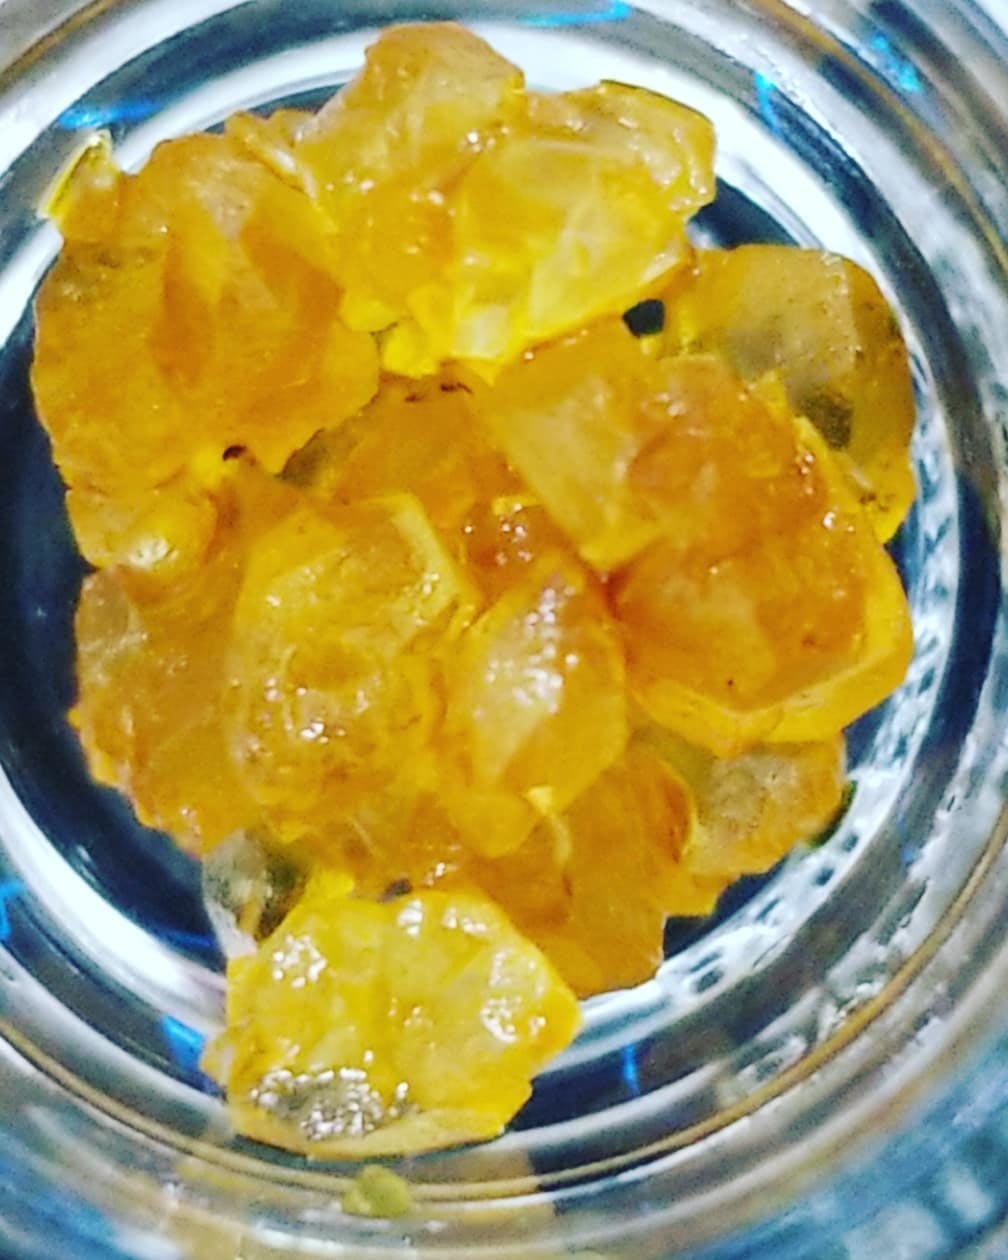 concentrate-double-black-extracts-thca-facet-crystals-pipe-dream